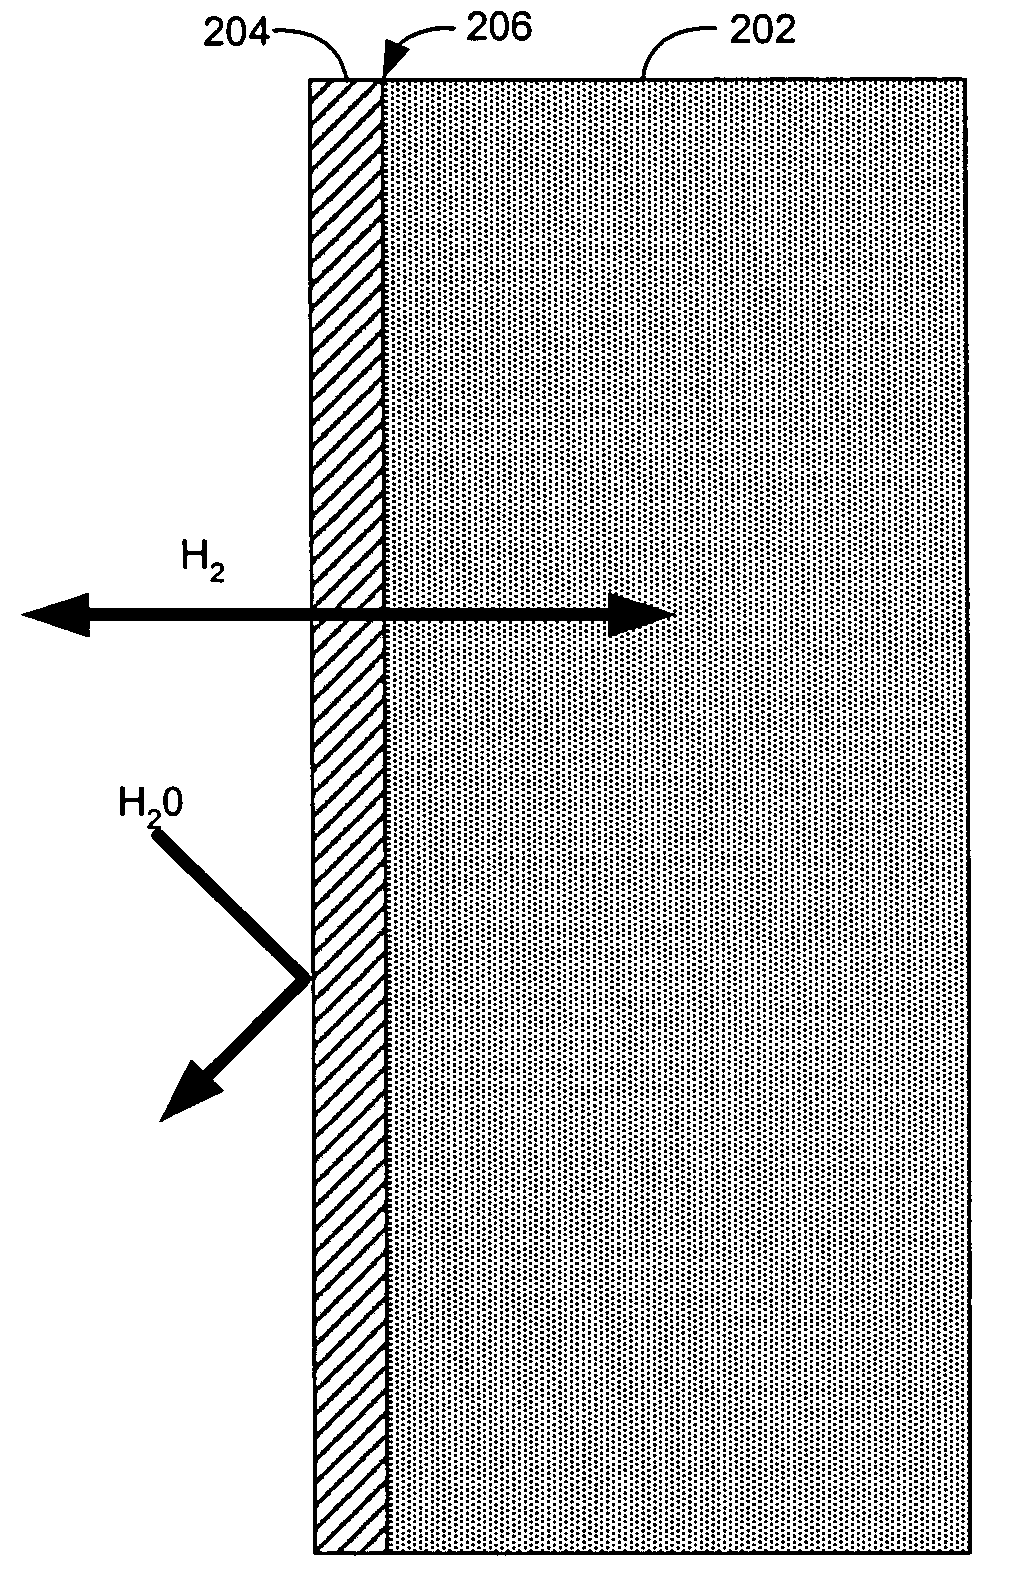 Hydrogen diffusion electrode for protonic ceramic fuel cell